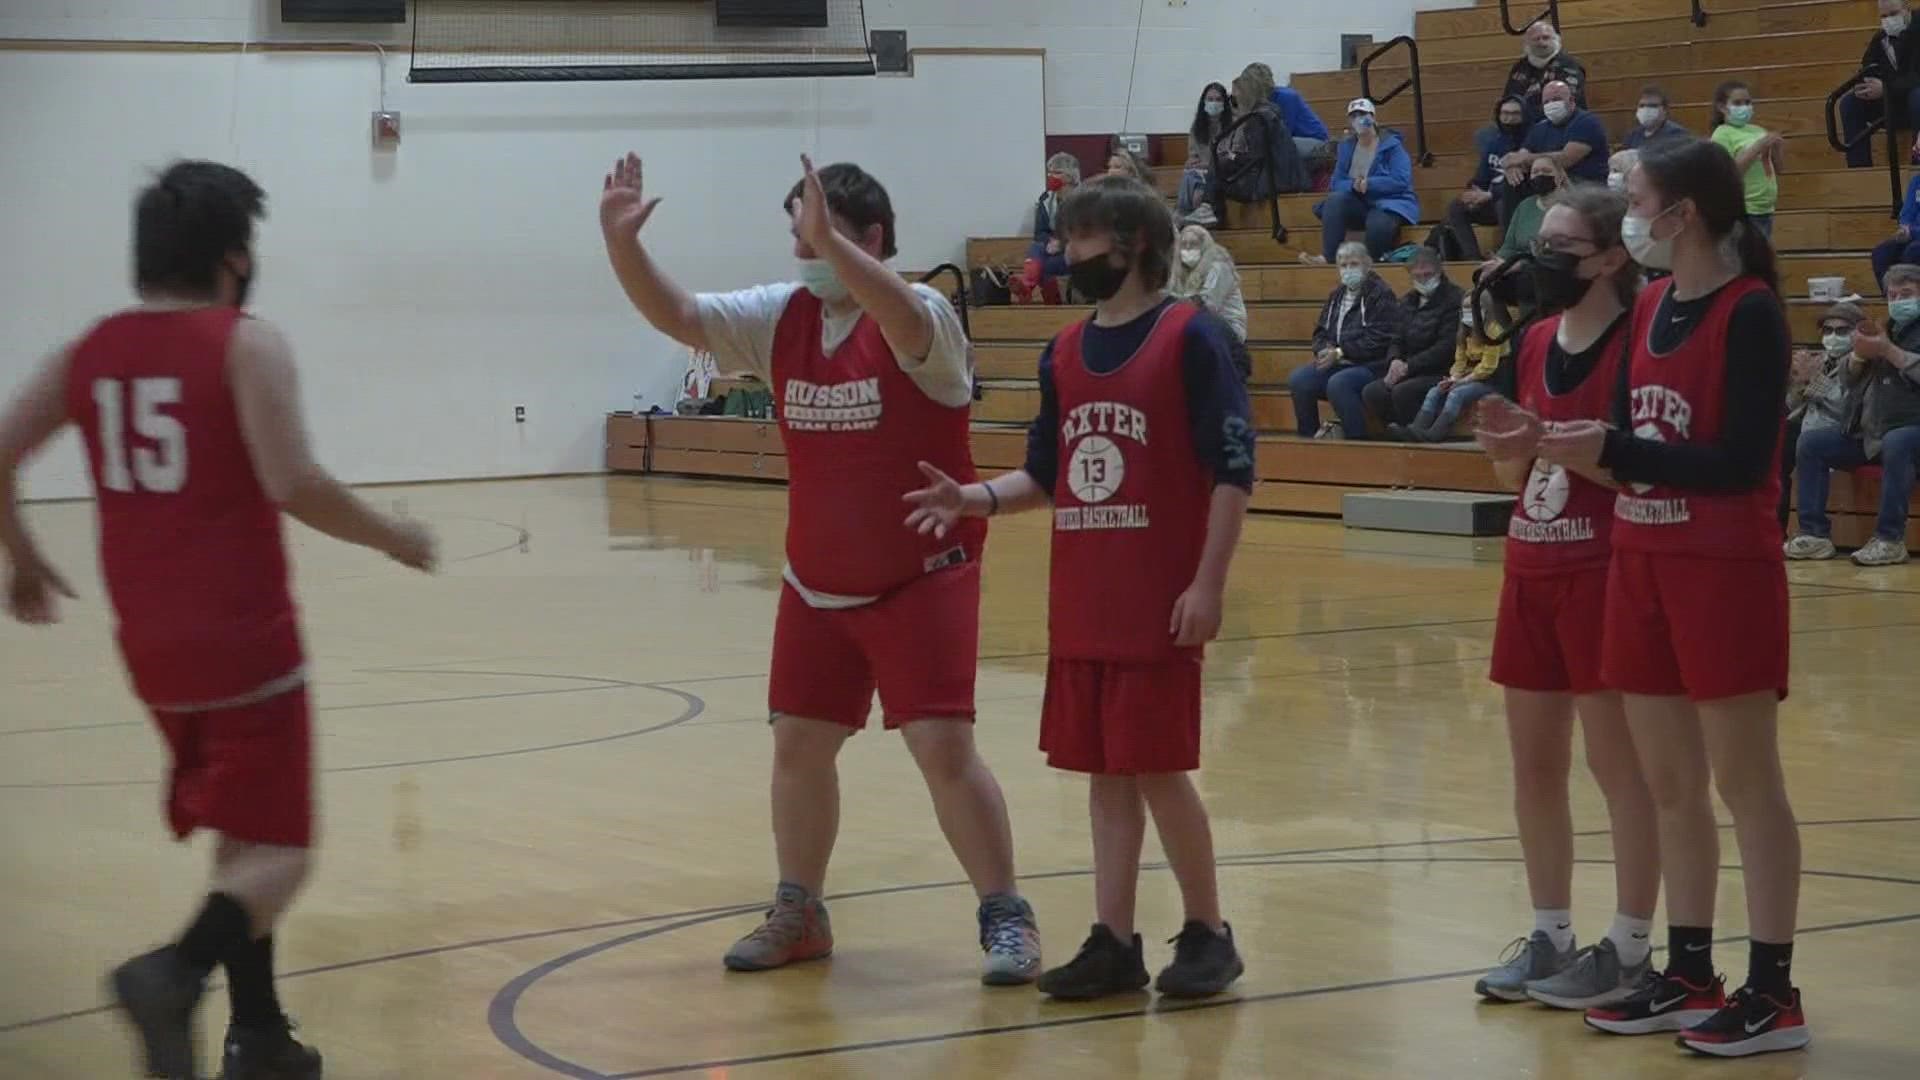 Several high school teams from the Greater Bangor area took part in the unified basketball event on Saturday, March 12 at Orono High School.